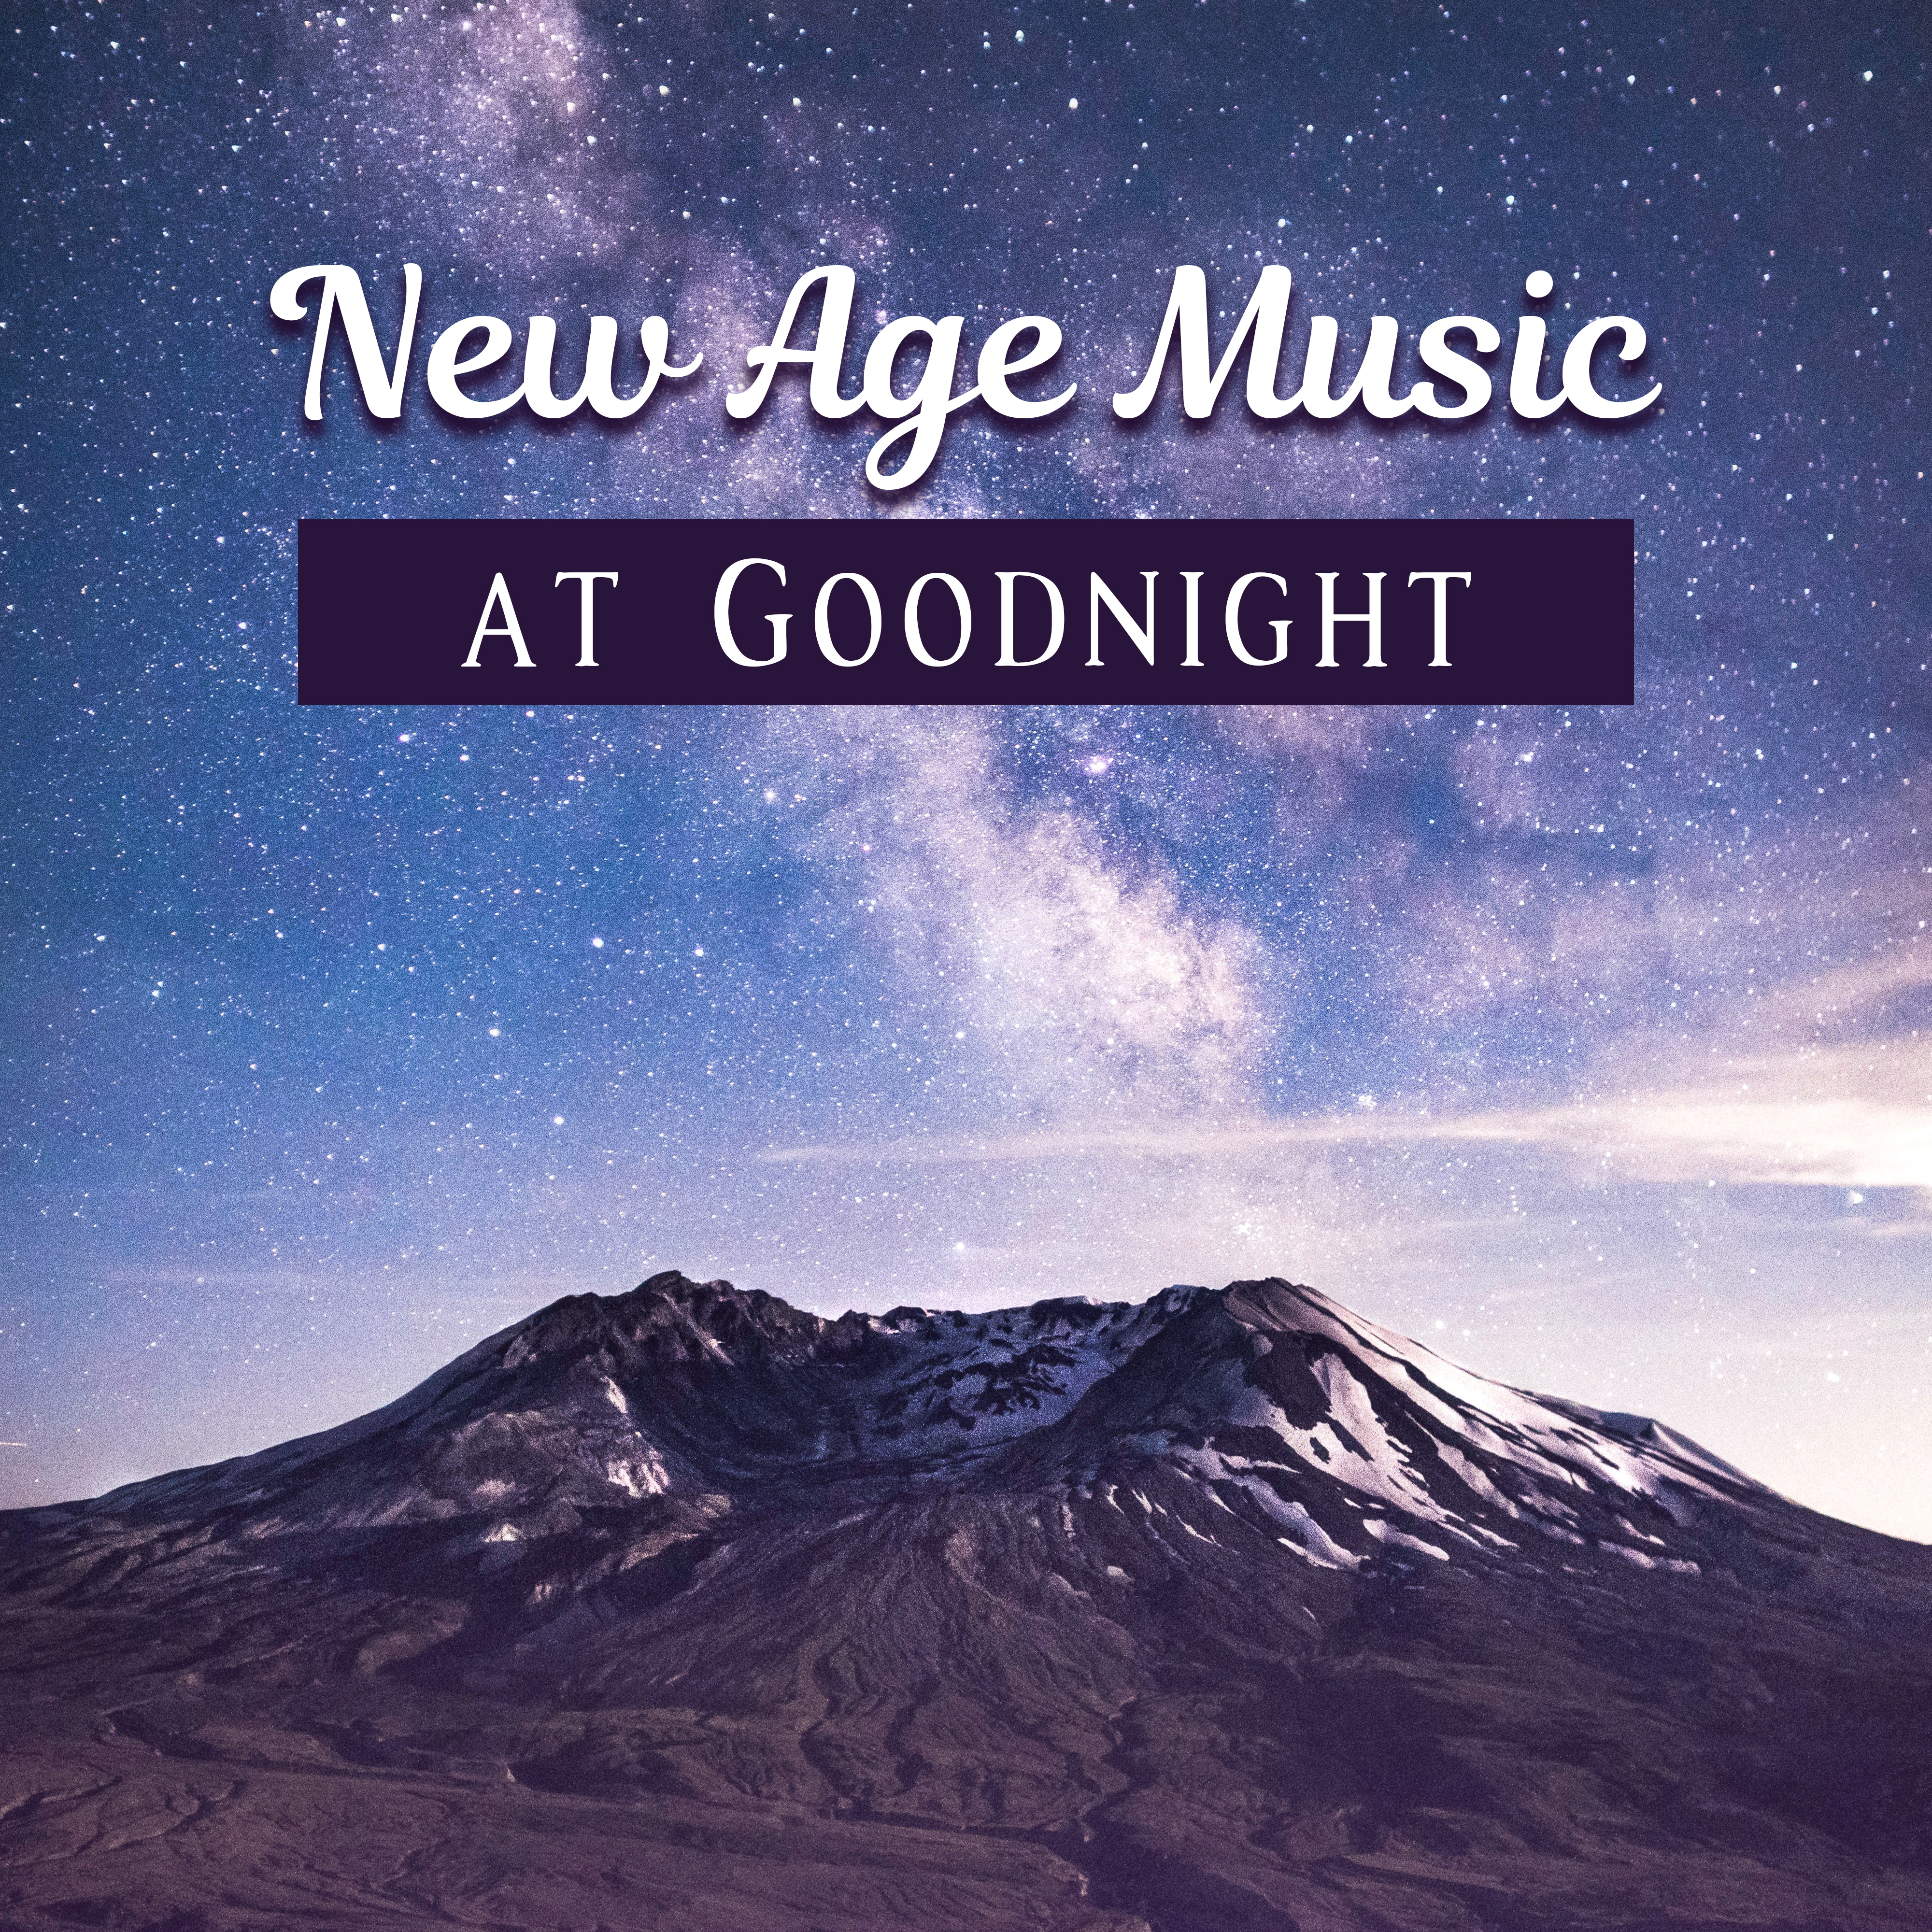 New Age Music at Goodnight – Healing Sounds to Rest, Pure Sleep, Deep Relax, Sweet Dreams, Naptime